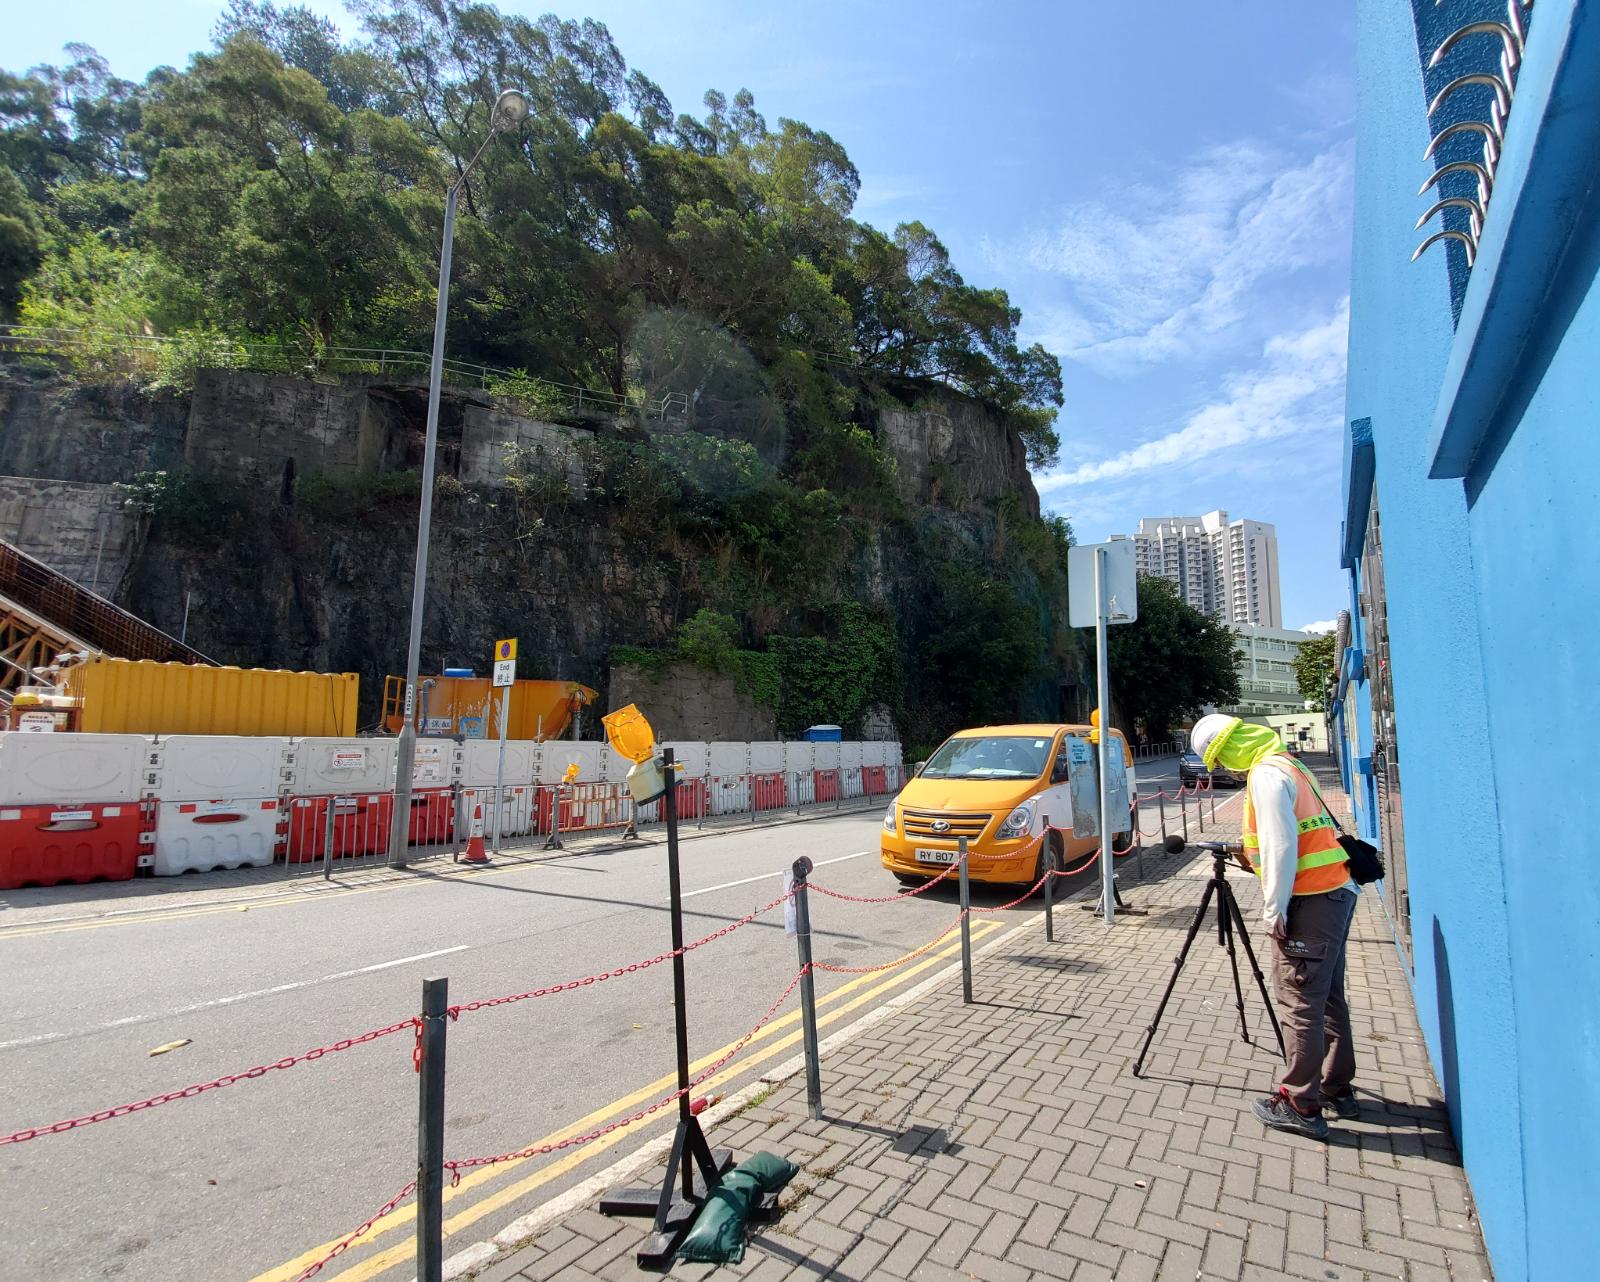 The engineering team visited construction site and local schools and conduct measurement of noise level during the HKDSE period.